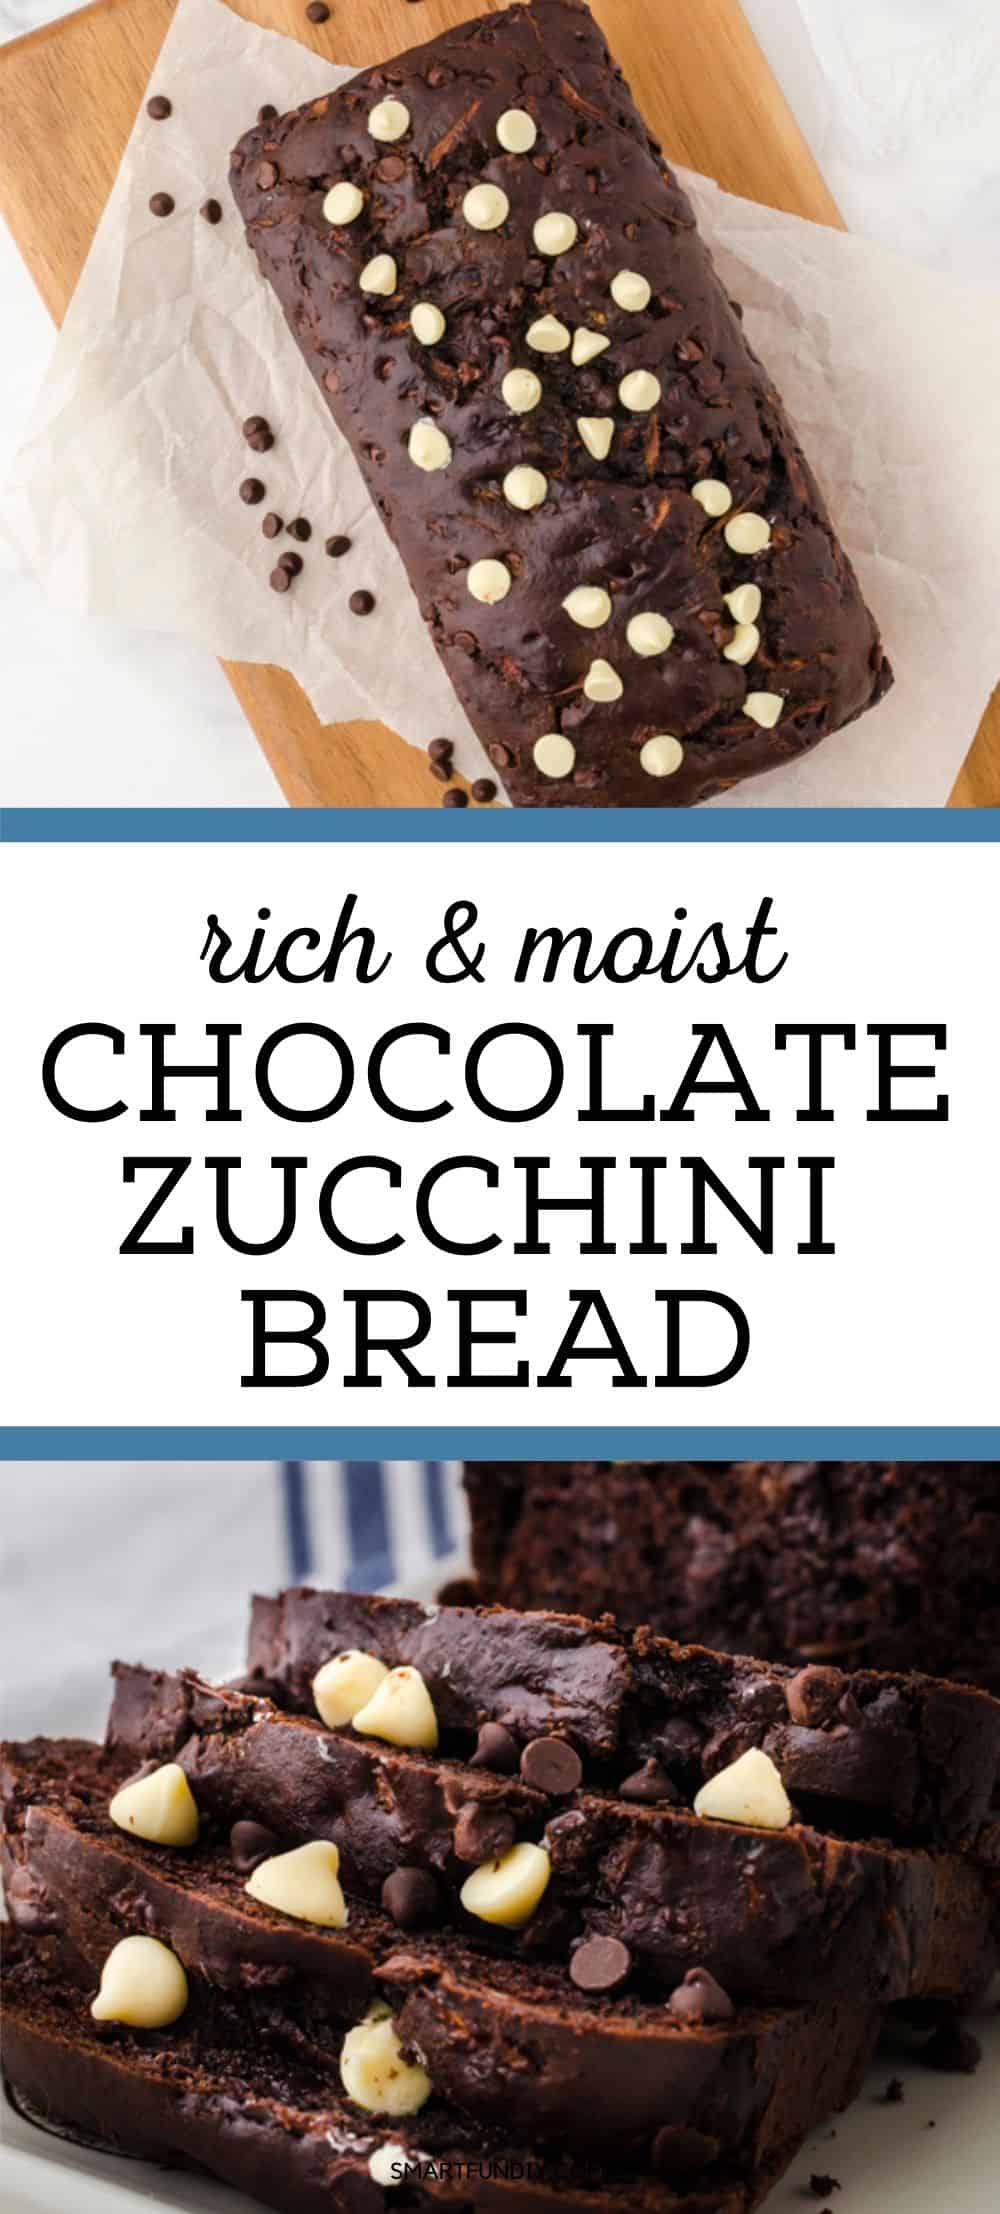 Chocolate Zucchini Bread with not double chocolate, but TRIPLE chocolate!